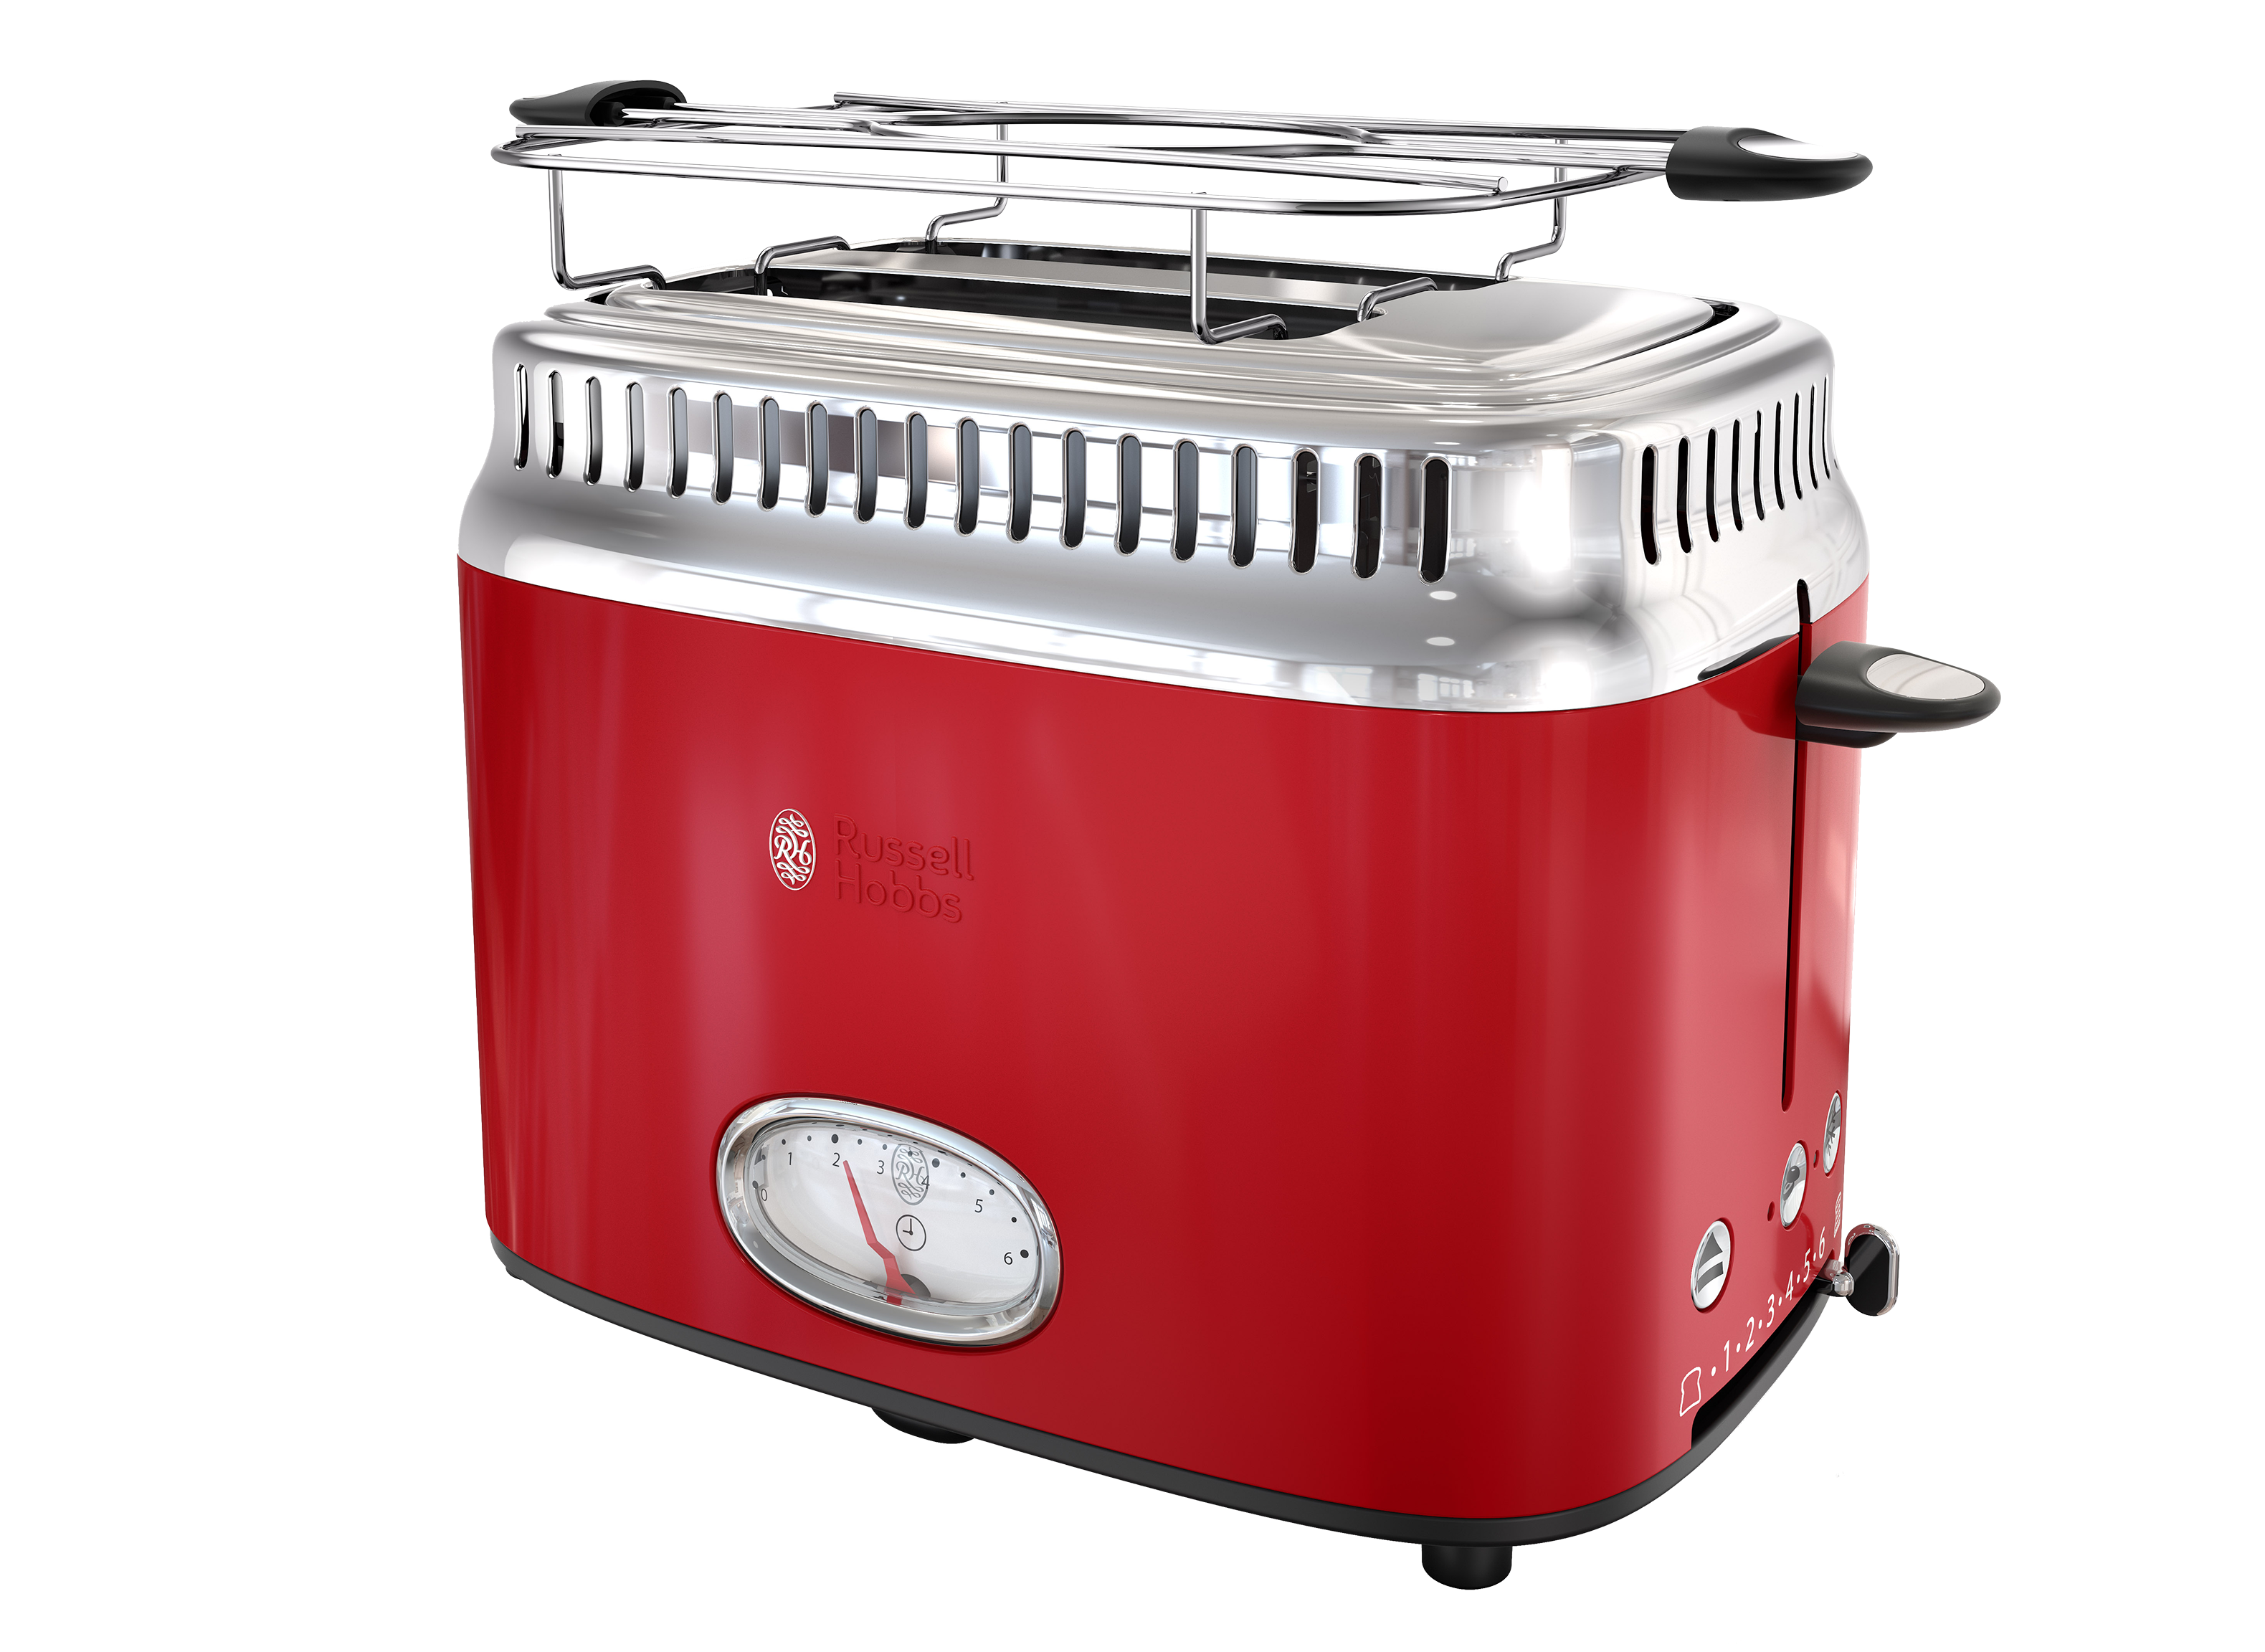 https://crdms.images.consumerreports.org/prod/products/cr/models/394049-toasters-russellhobbs-retrostyletr9150rdr.png